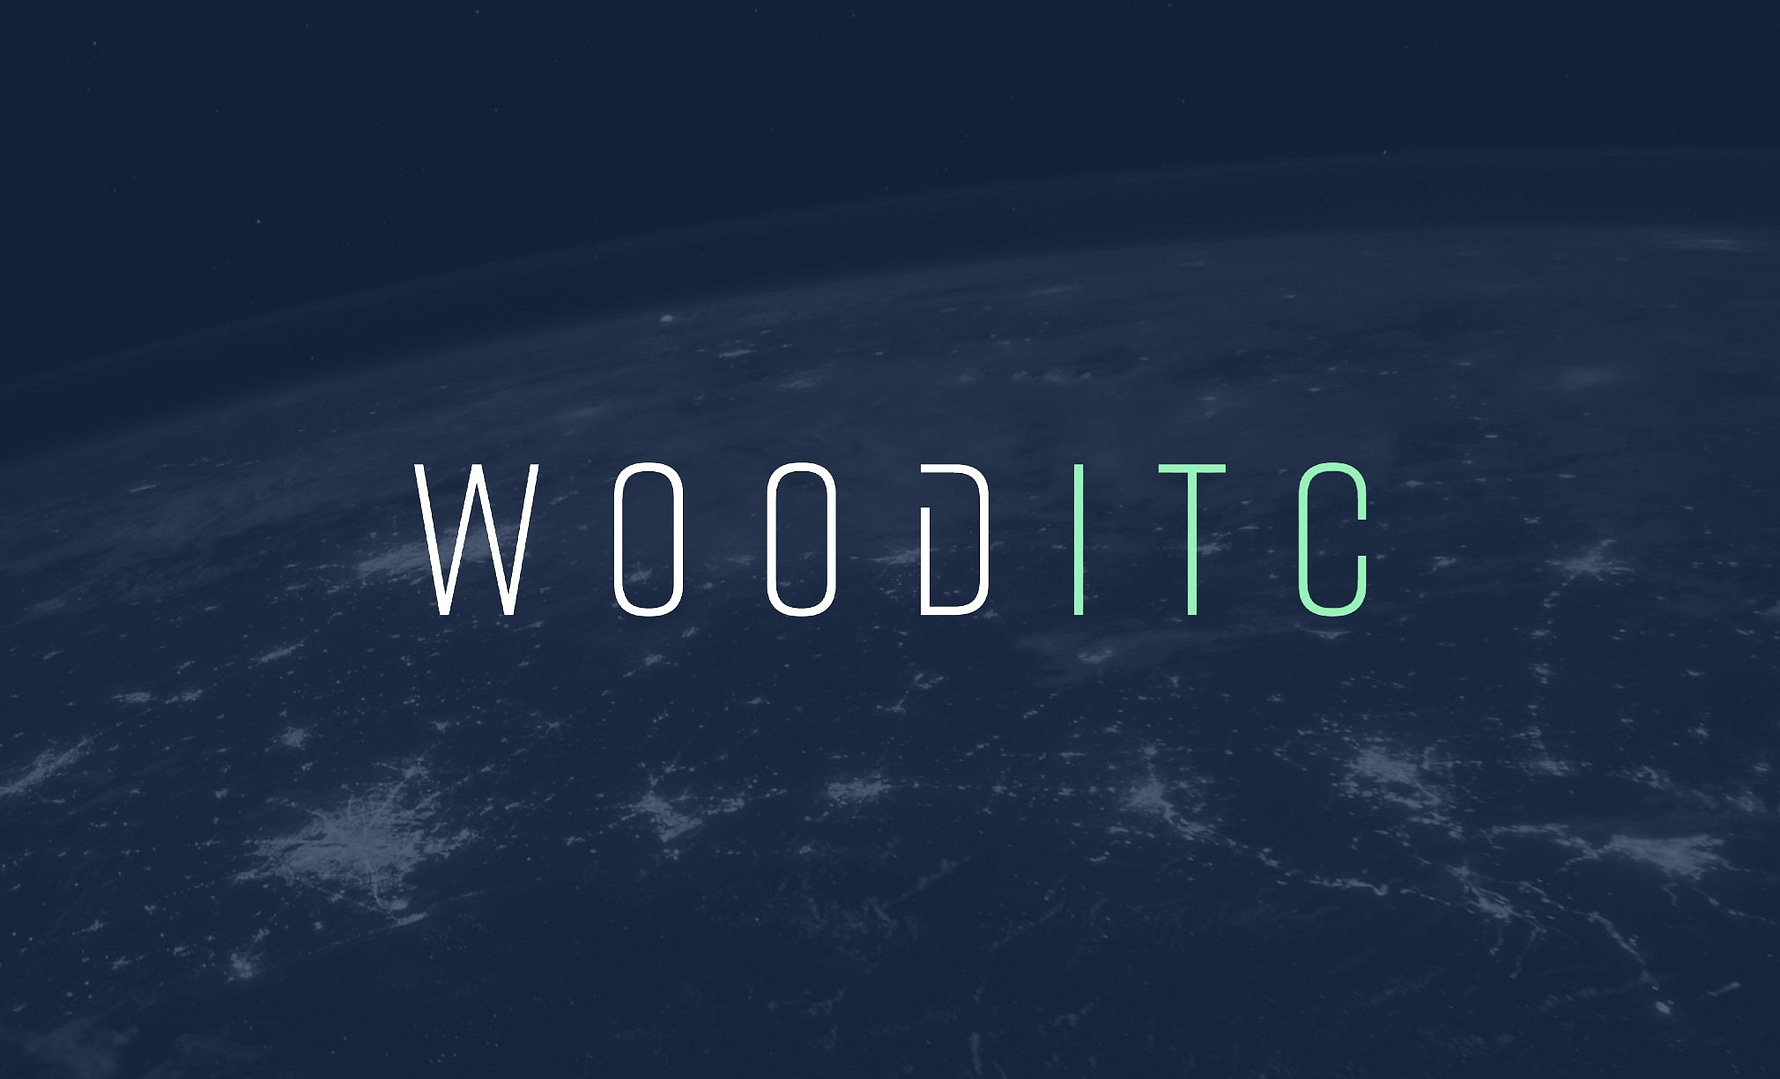 Wood ITC customer story featured